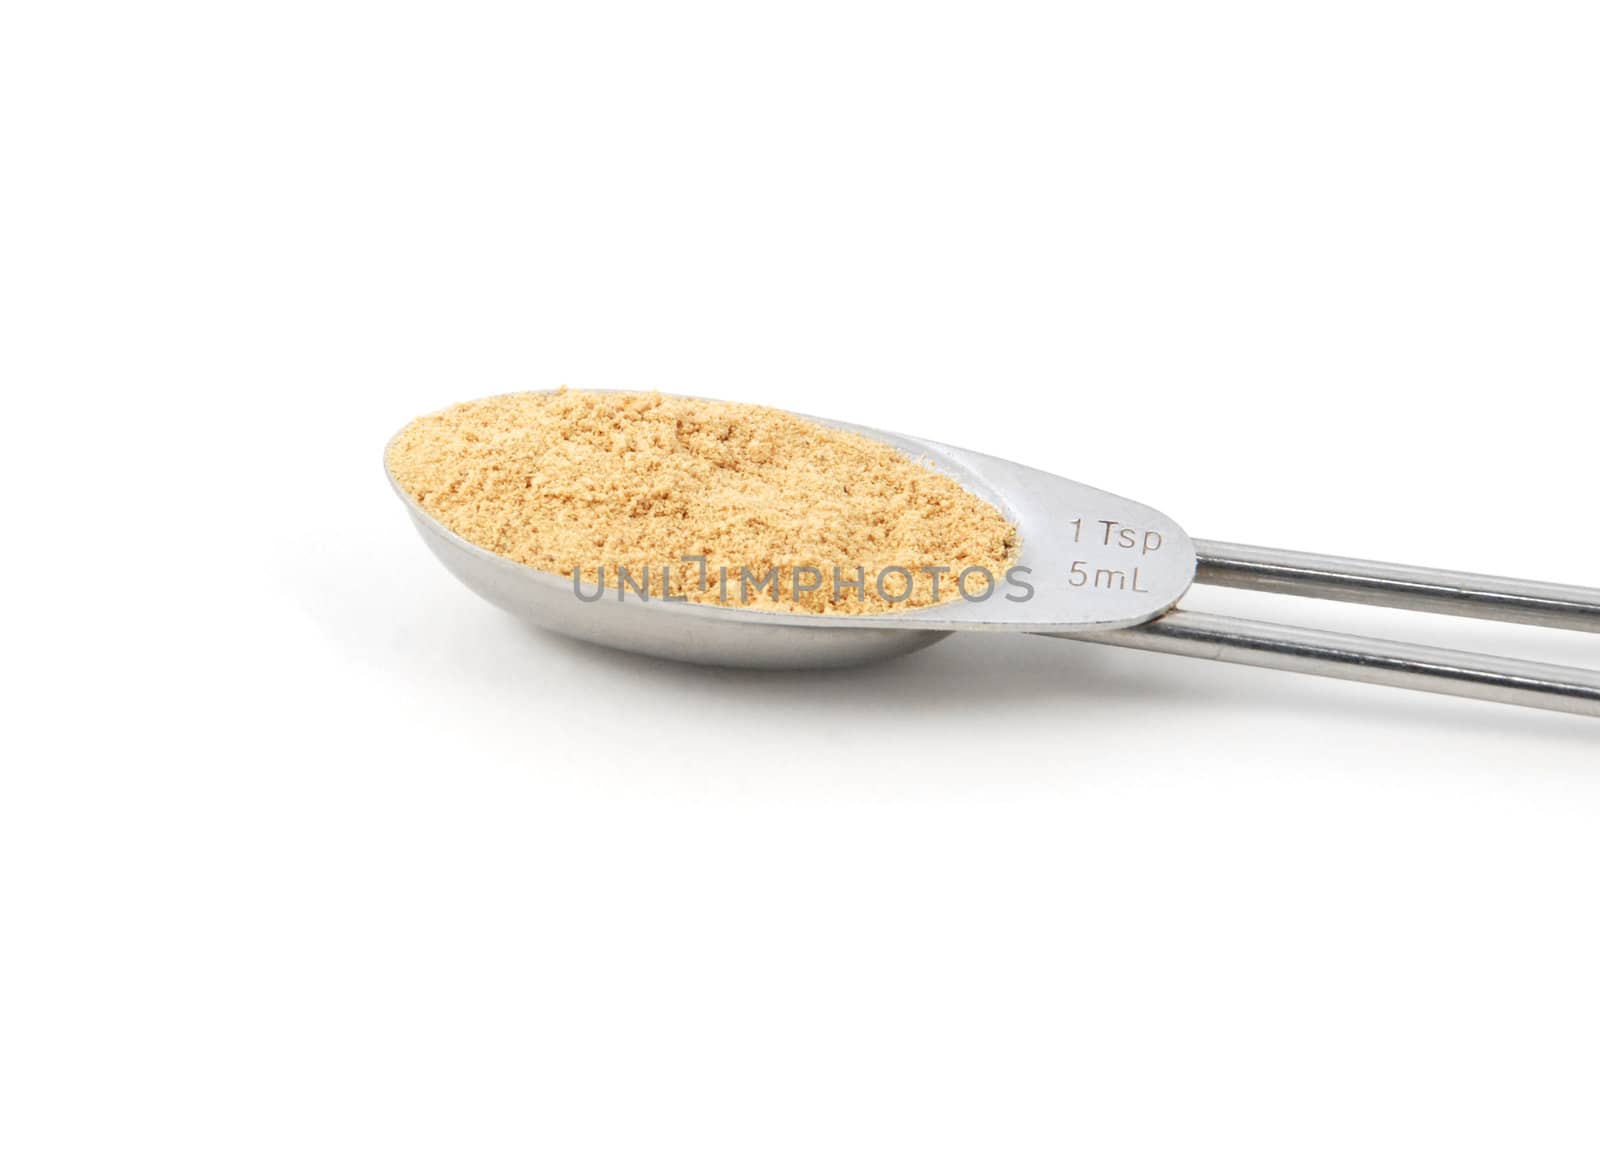 Ground ginger measured in a metal teaspoon, isolated on a white background